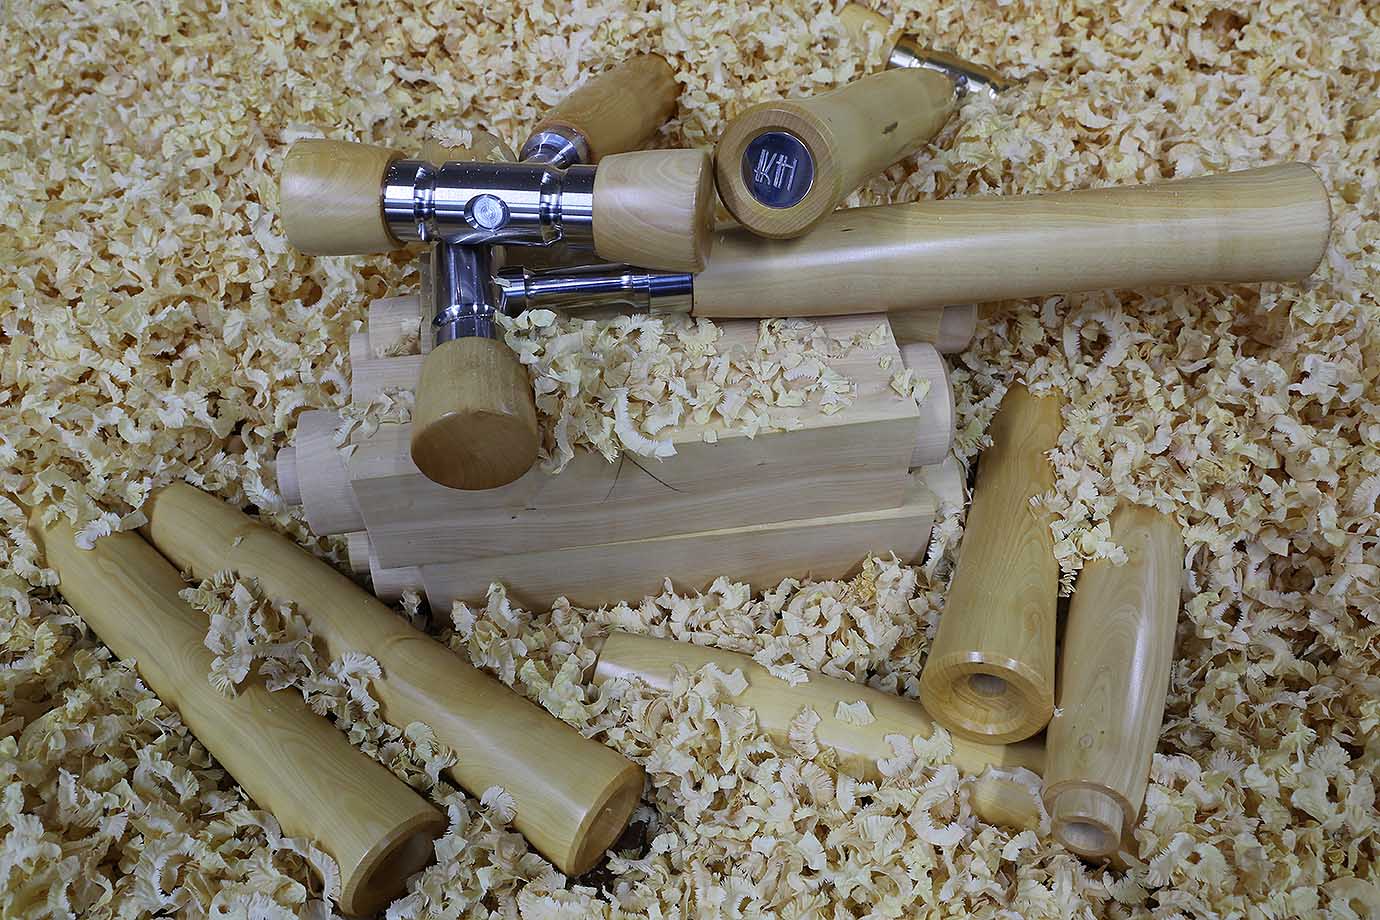 Setting hammer - With handles and shavings from turning.